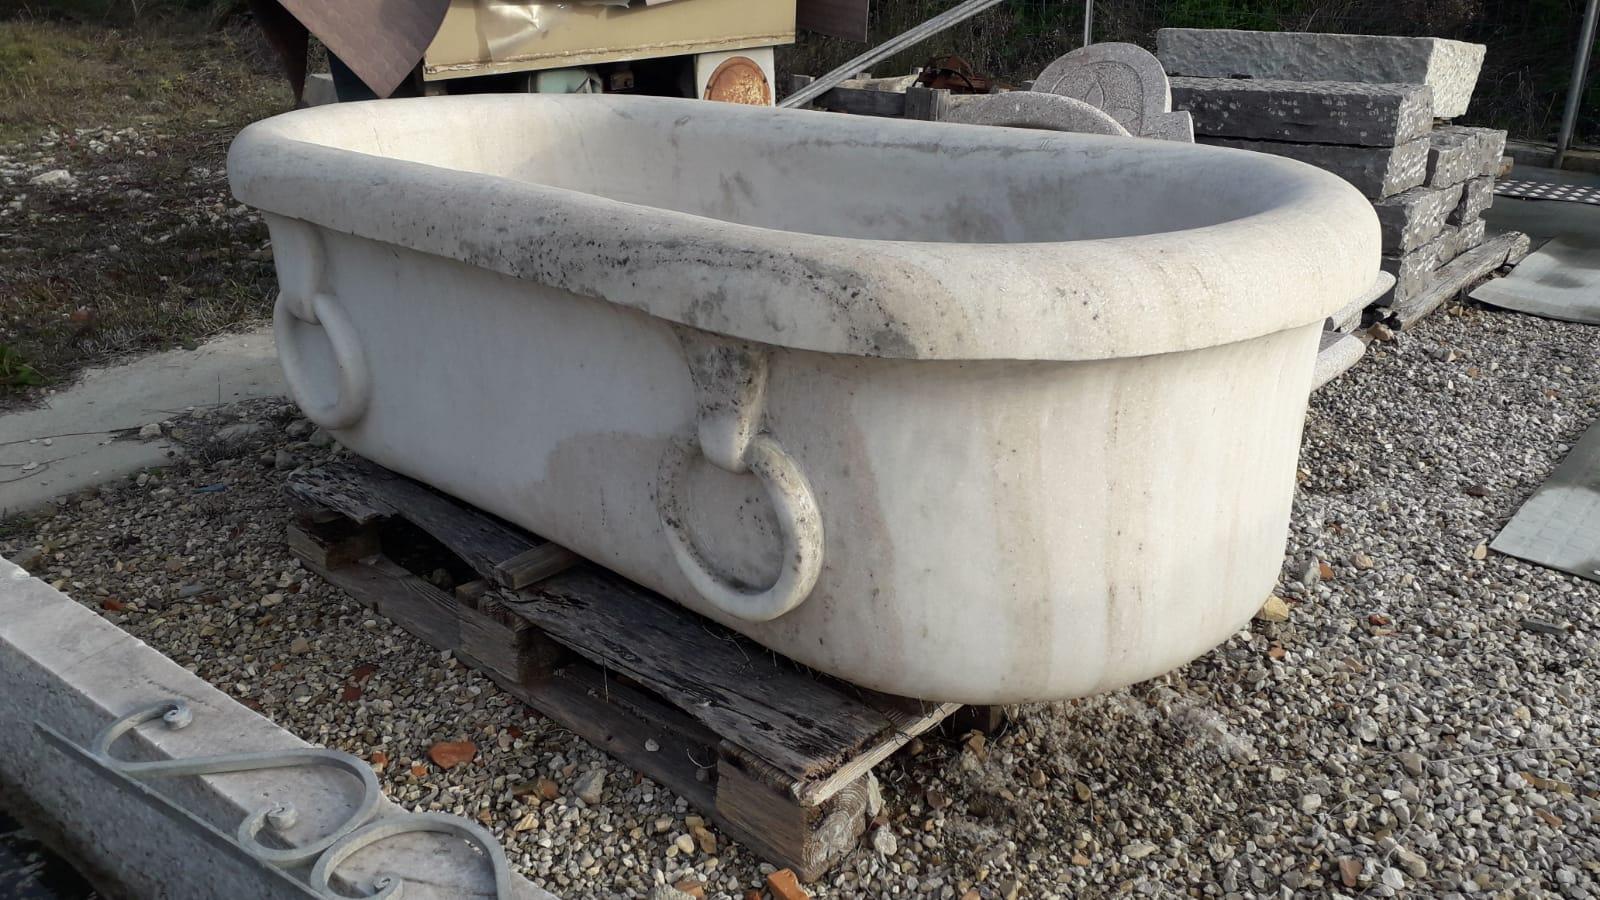 Large neoclassical style bath made in Scoplito marble,
these designs have not changed since Roman or Greek times with these superb simple lines
and excellent proportions.

Dimensions:
External 71